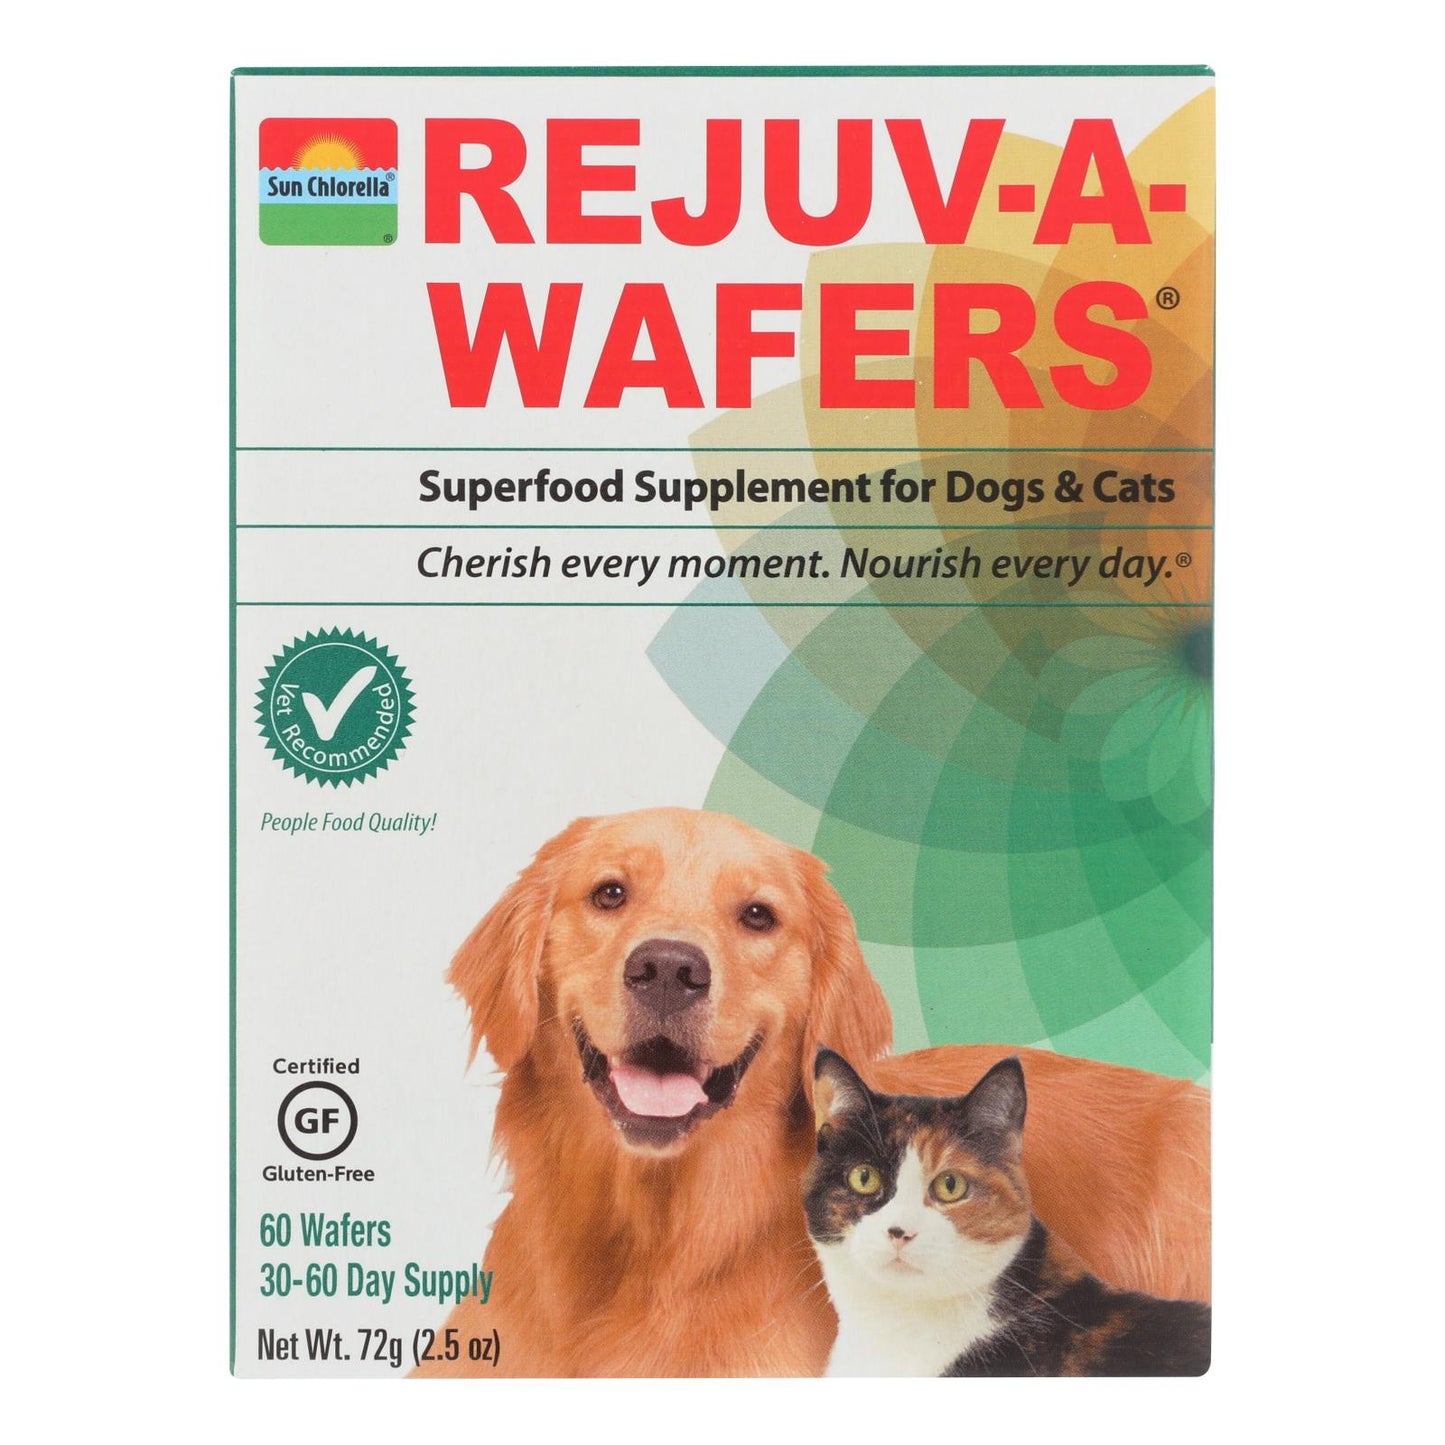 Sun Chlorella Rejuv-a-wafers Superfood Supplement For Dogs And Cats - 60 Wafers